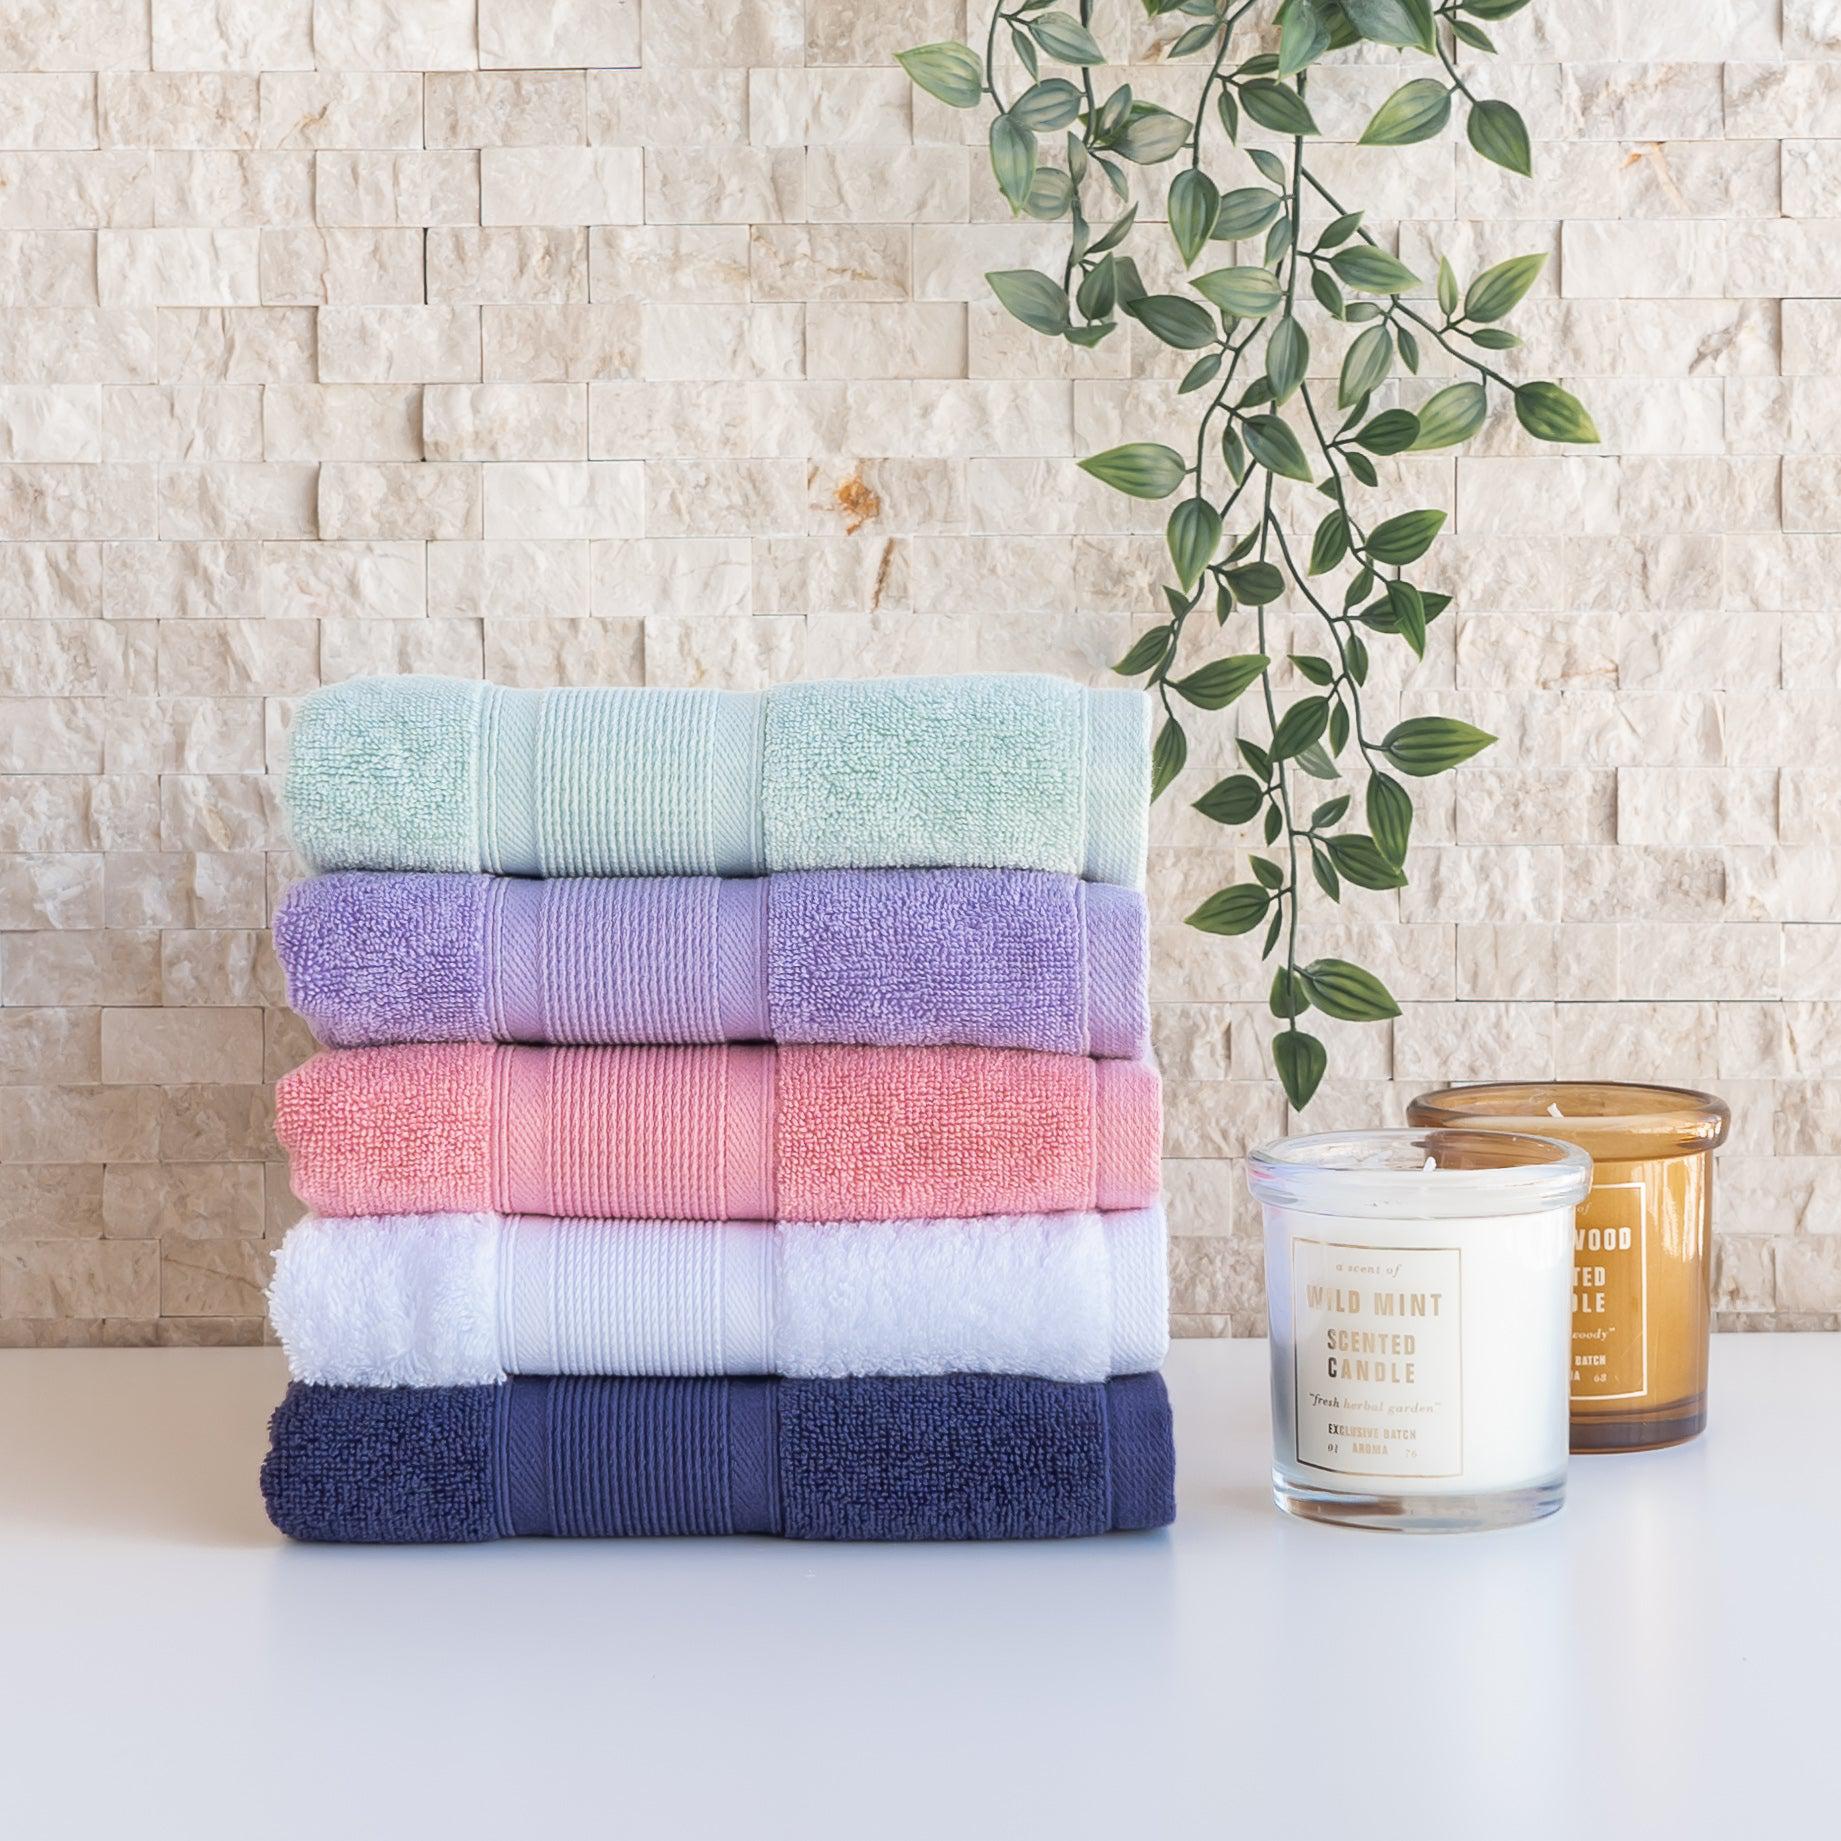 Stack Of Neatly Folded Colorful Kitchen Towels, On White